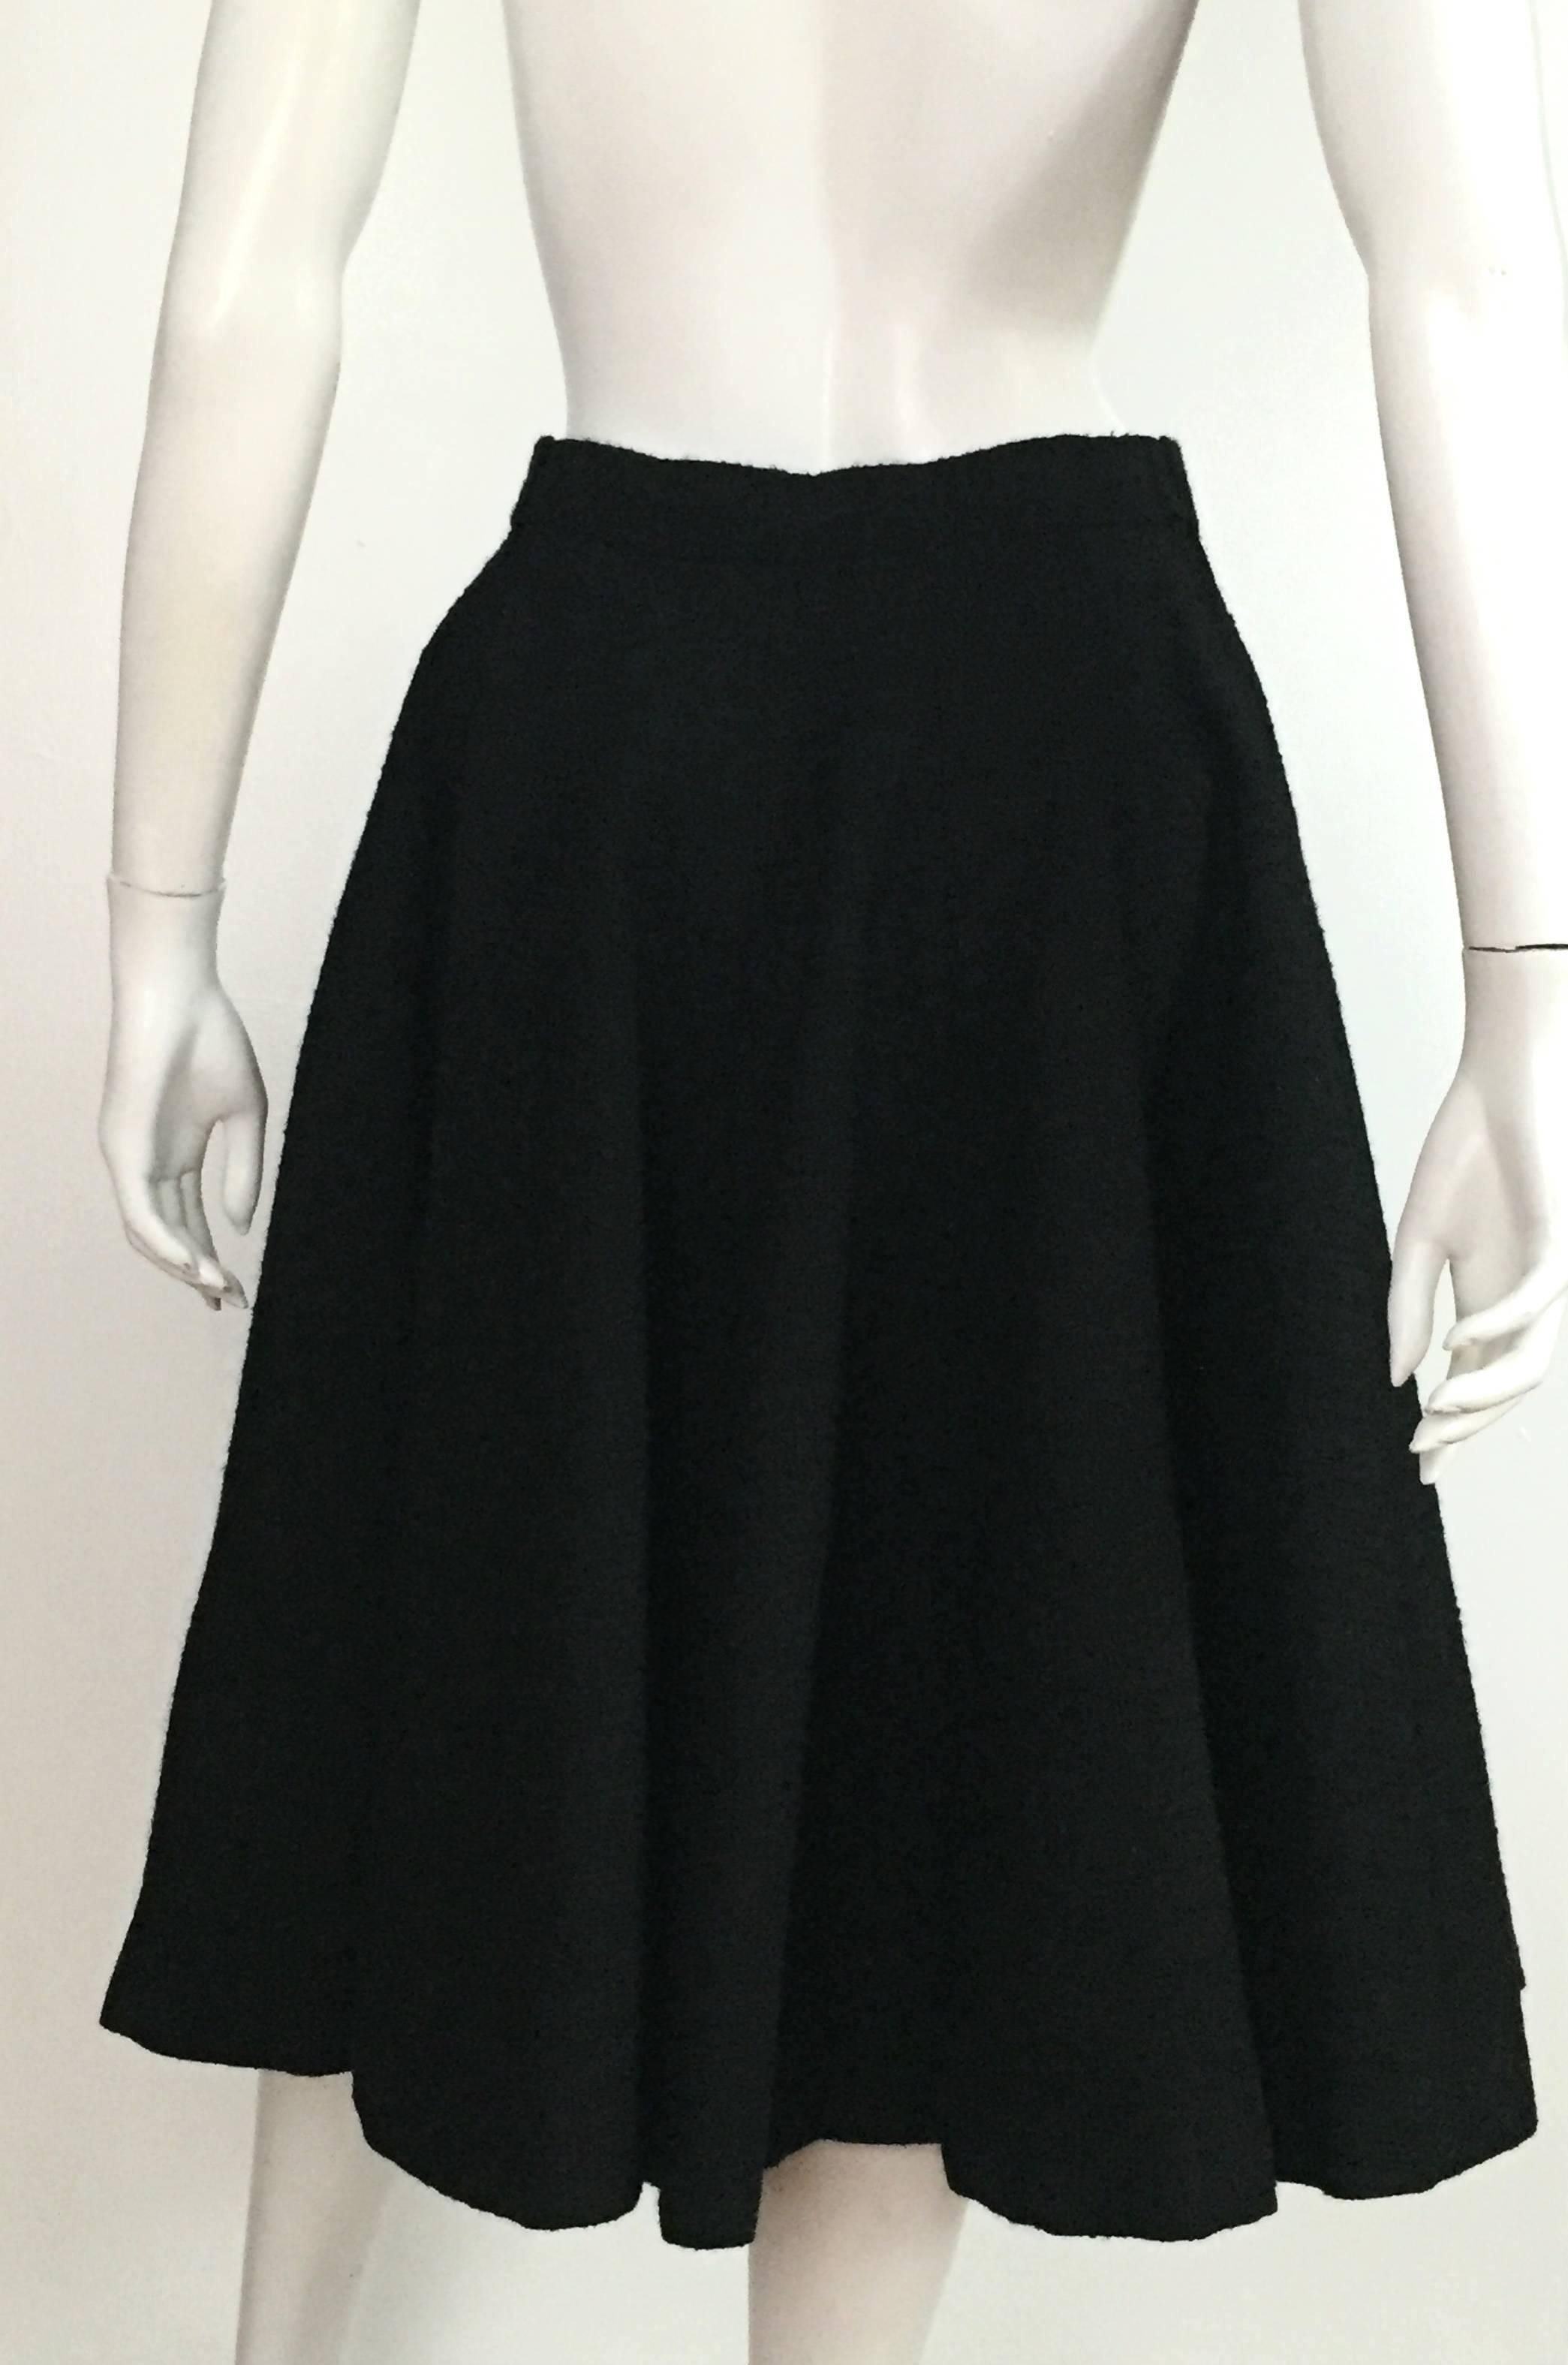 Black Norman Norell 1957 black wool flare skirt size 6 / 8.  For Sale